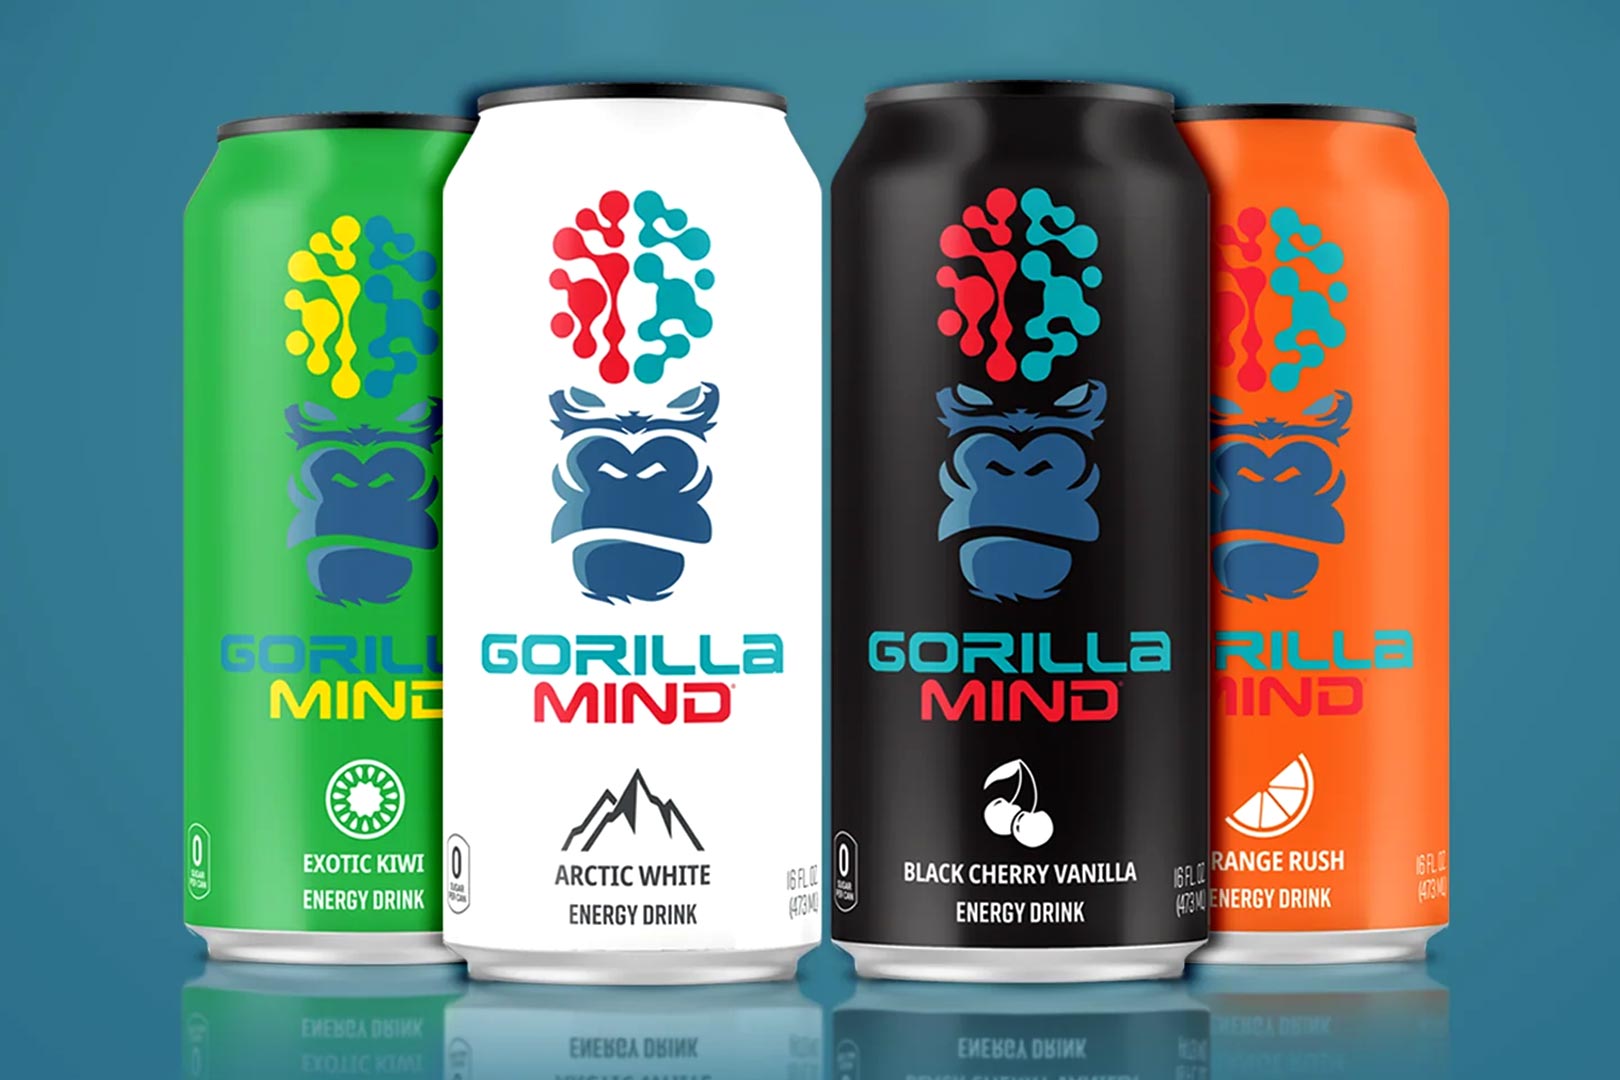 Where To Buy Gorilla Mind Energy Drink